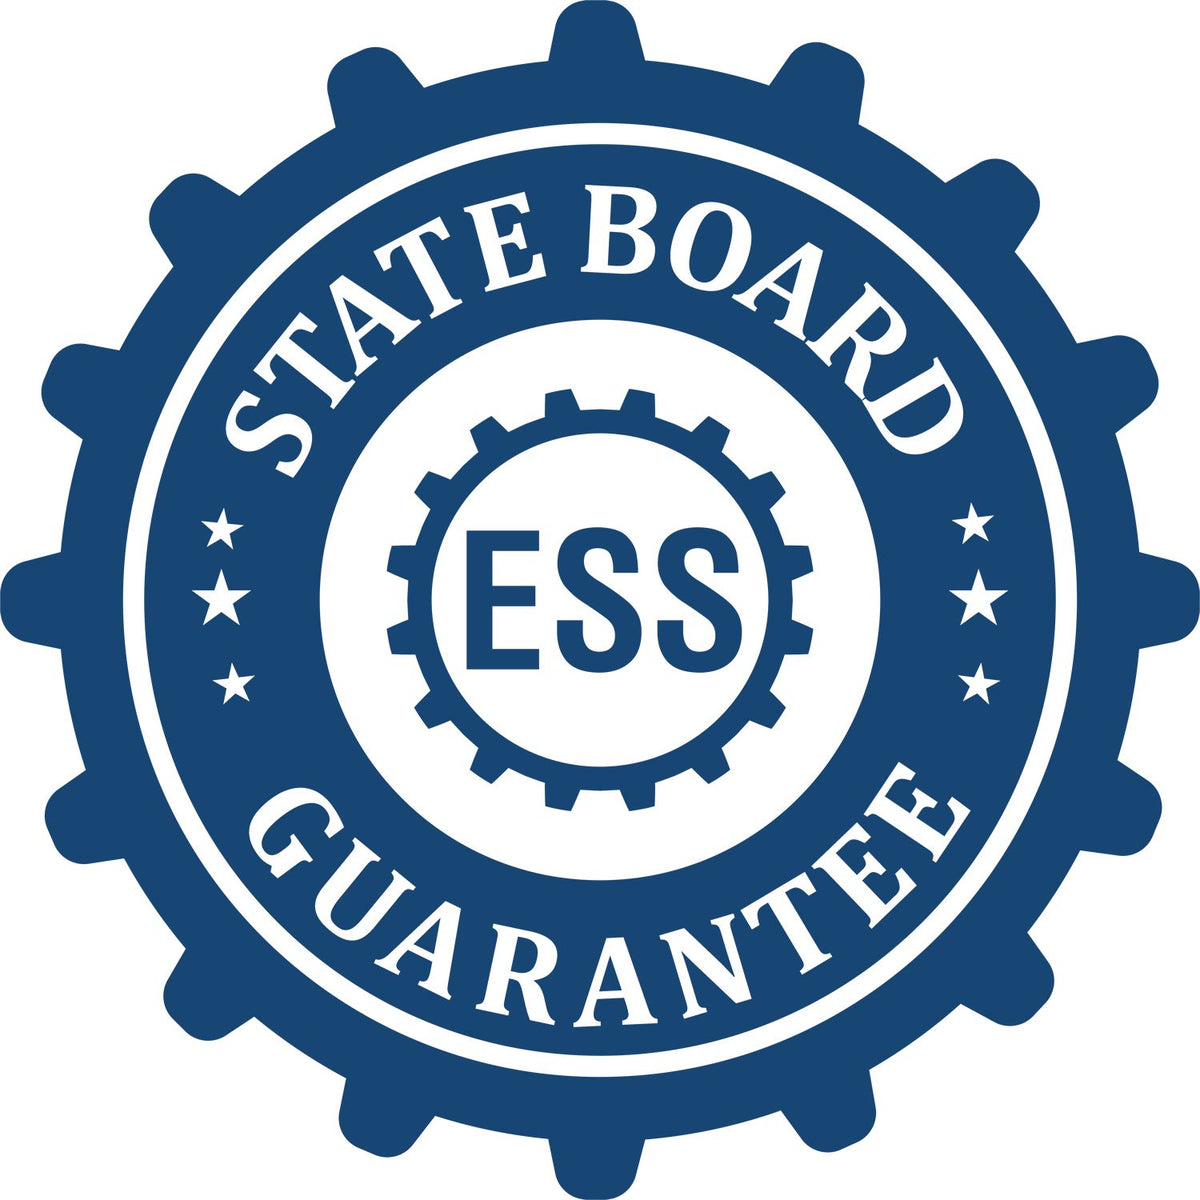 An emblem in a gear shape illustrating a state board guarantee for the Georgia Engineer Desk Seal product.